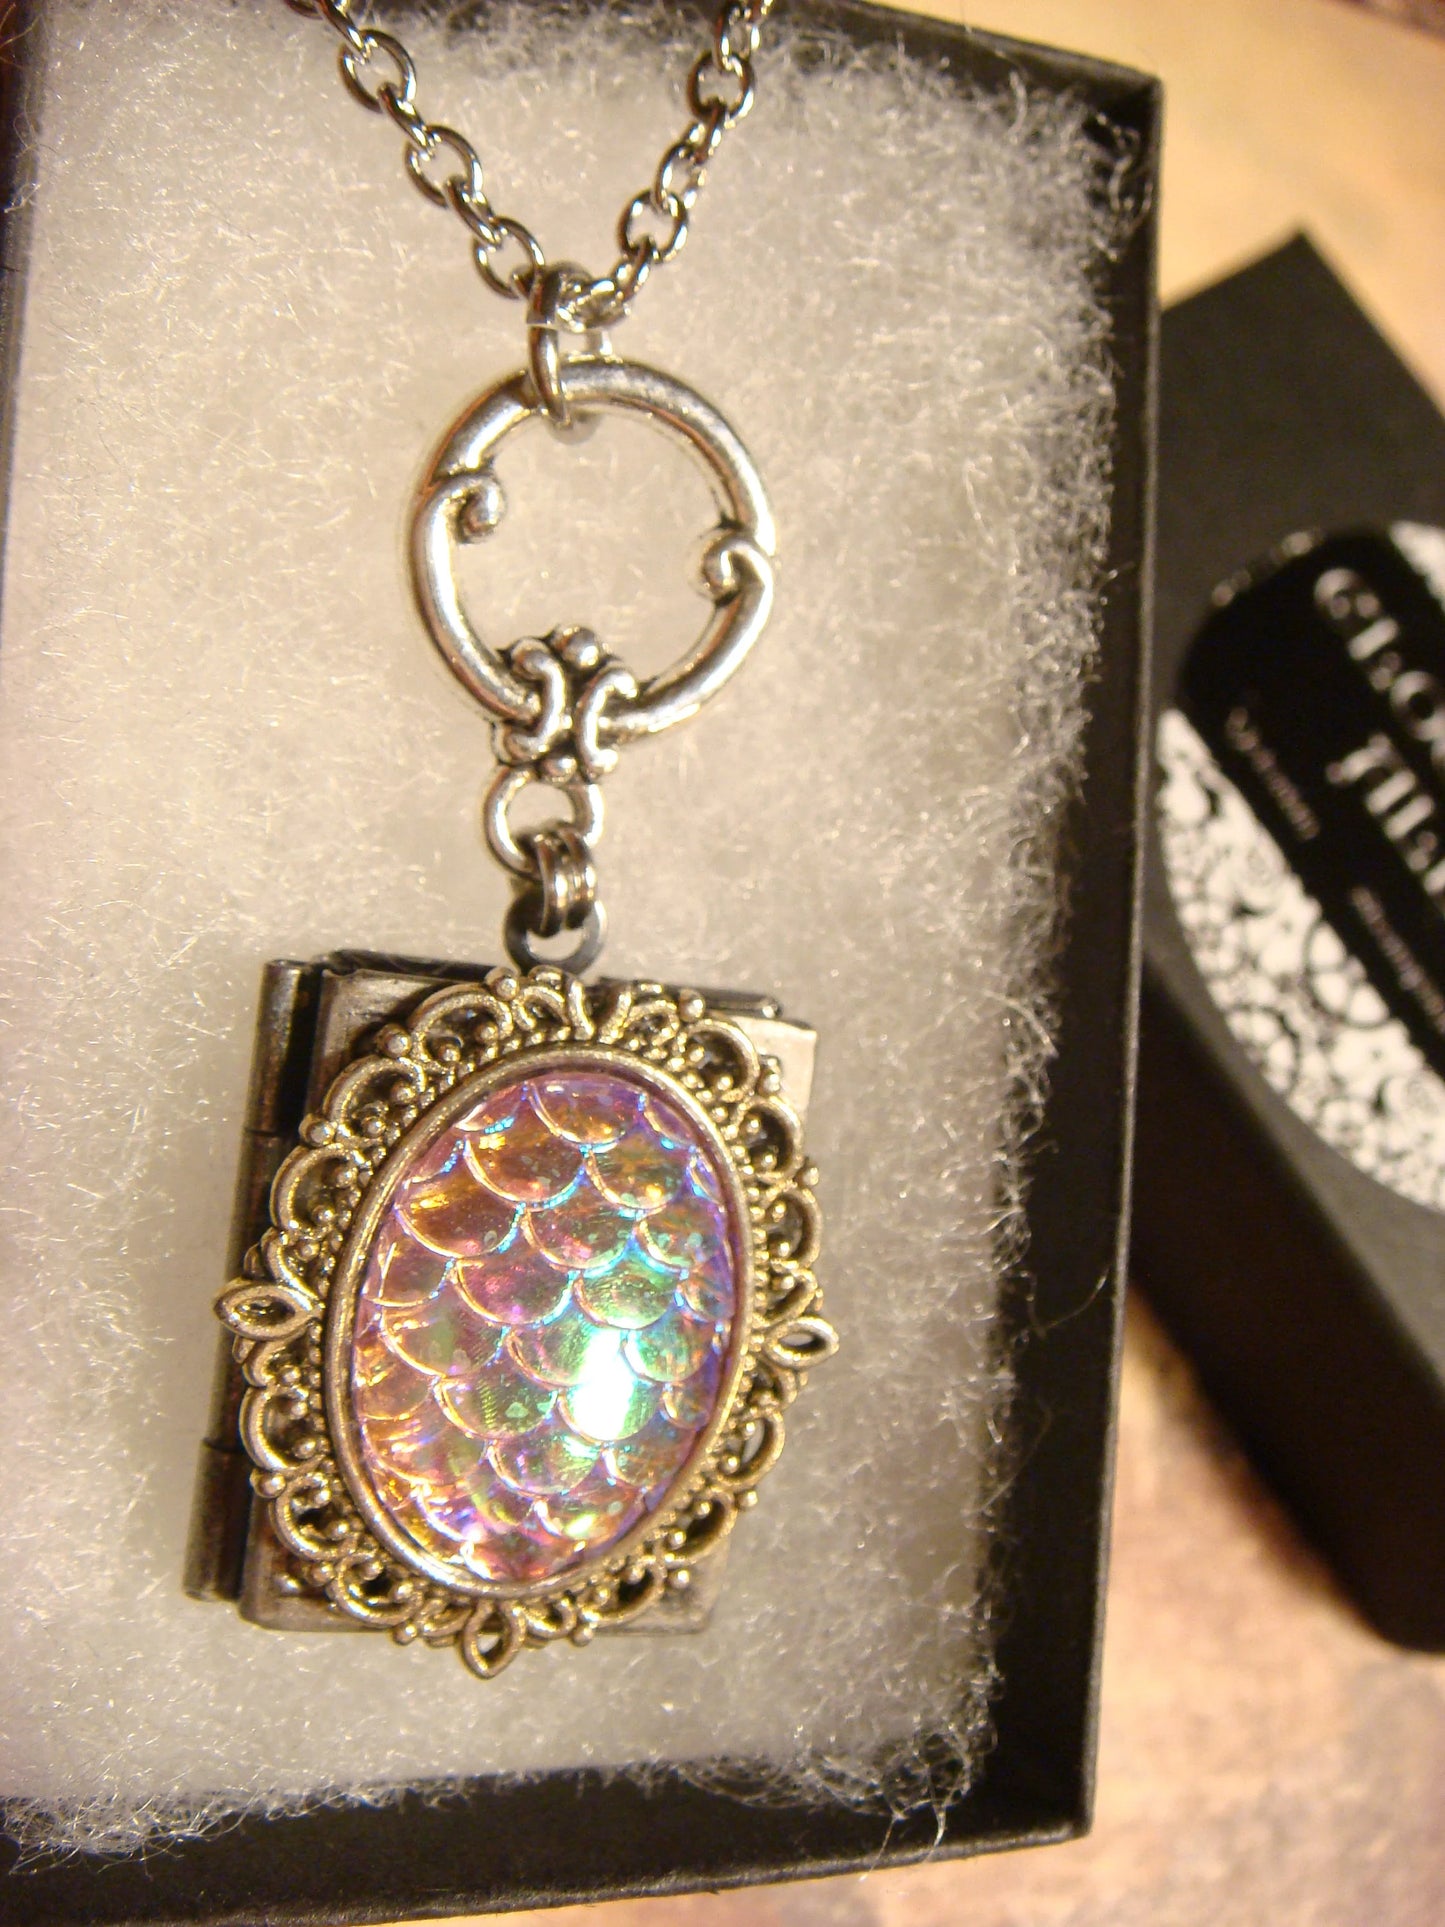 Iridescent Pink Scales Ornate Book Locket Necklace